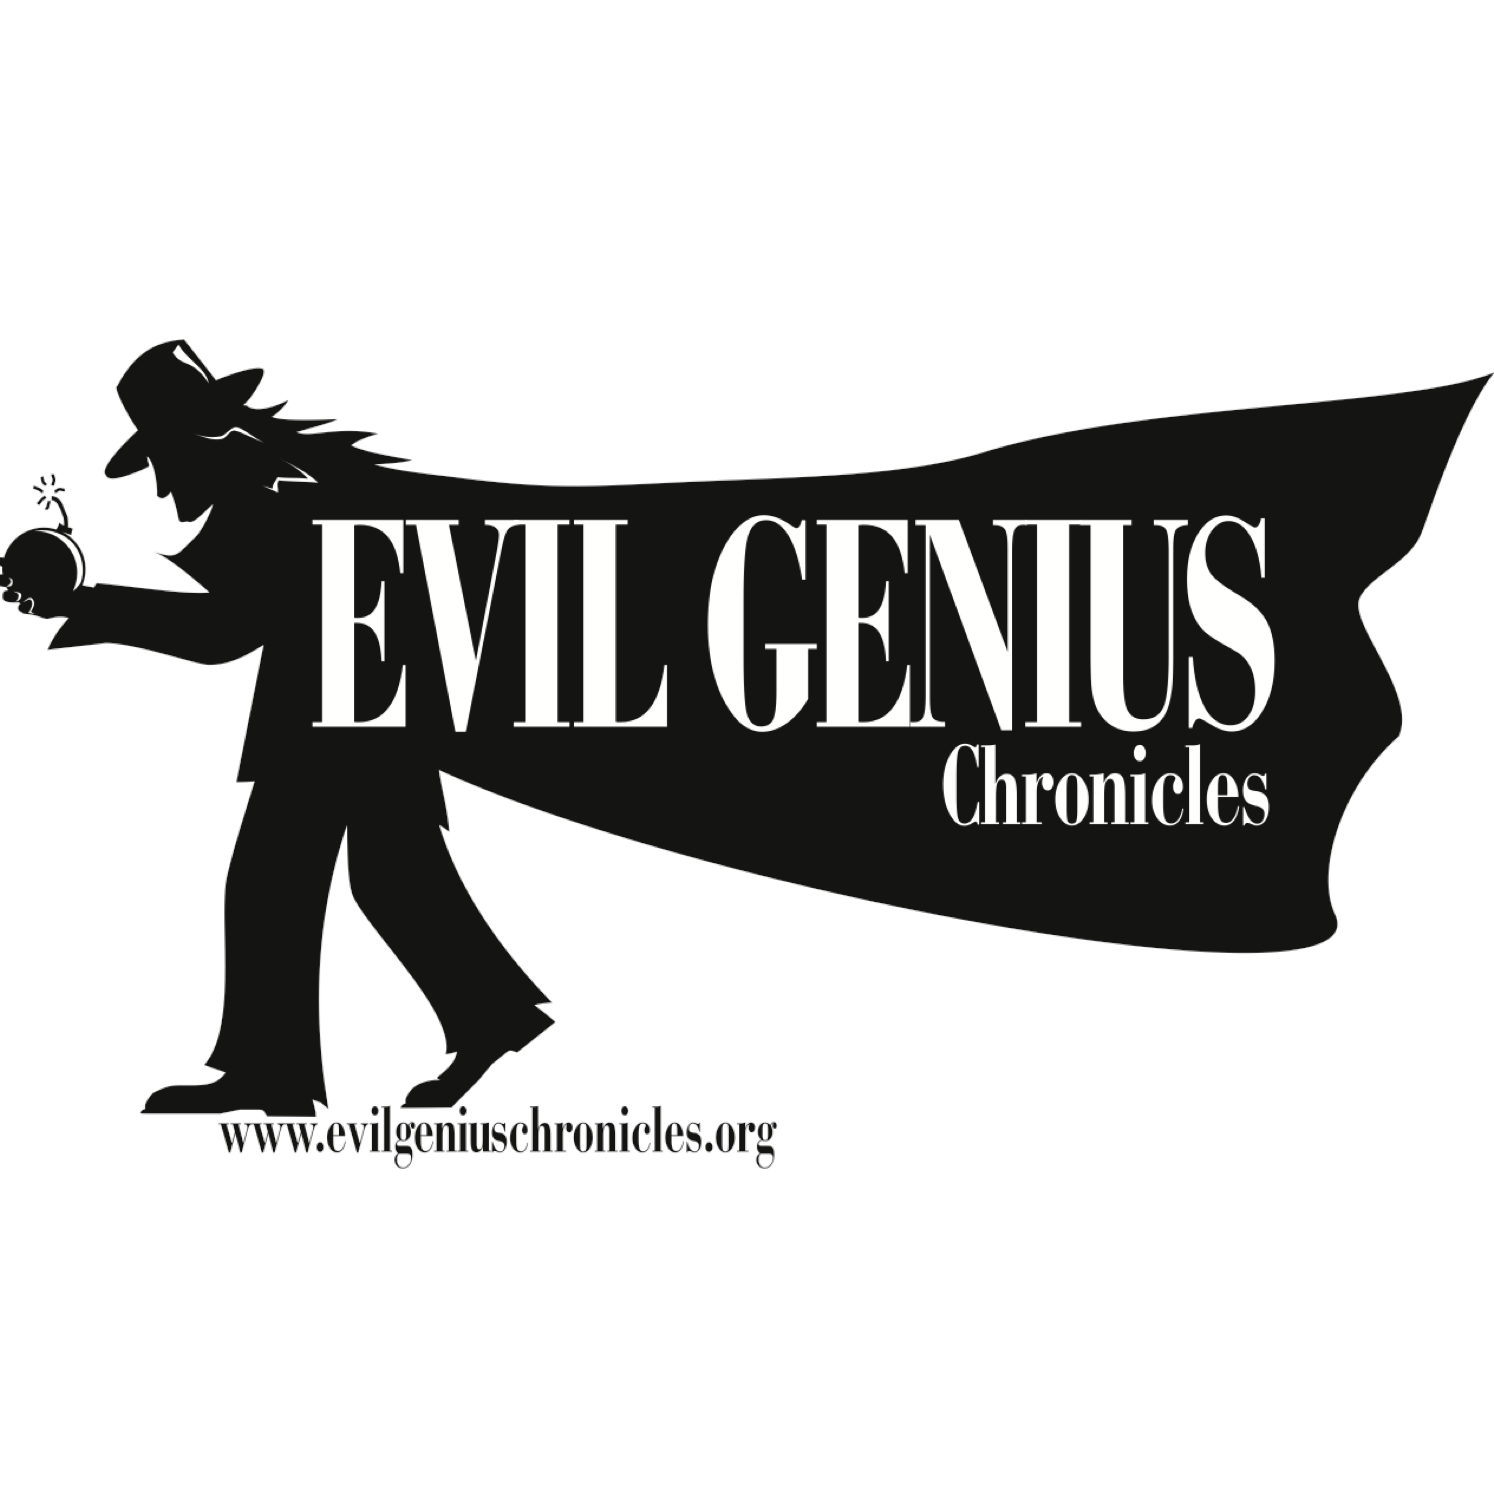 The Evil Genius Chronicles logo, a man with a cape holding a bomb with lit fuse